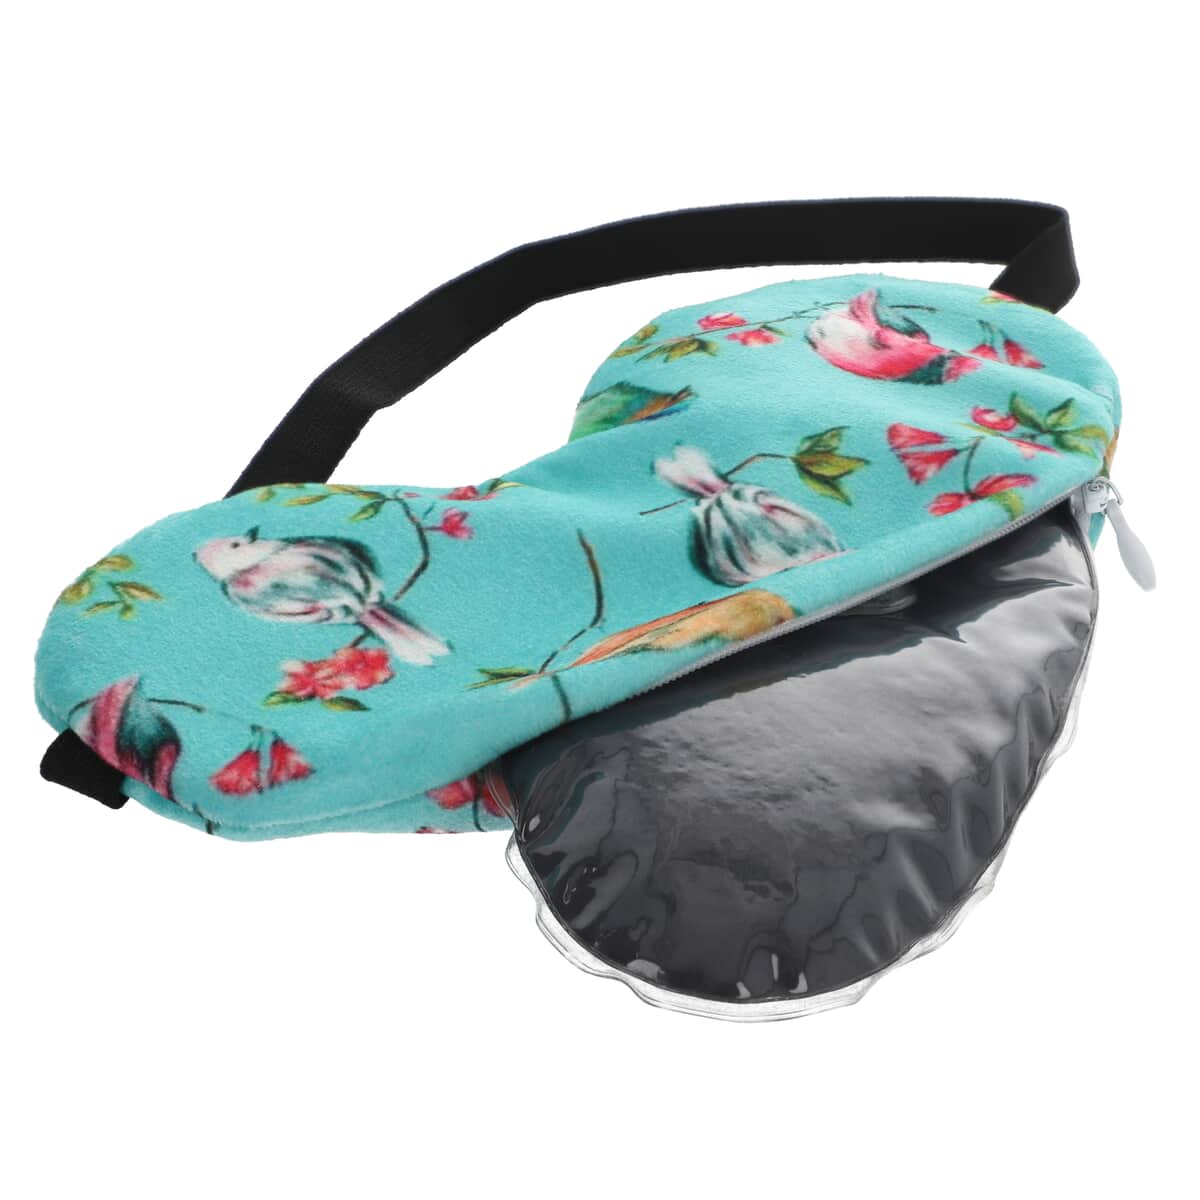 Multi Color Printed Cotton, Shungite Weighted Reusable Eye Mask (L8xW3) with Shungite Gel Sleeve and Adjustable Strap image number 5